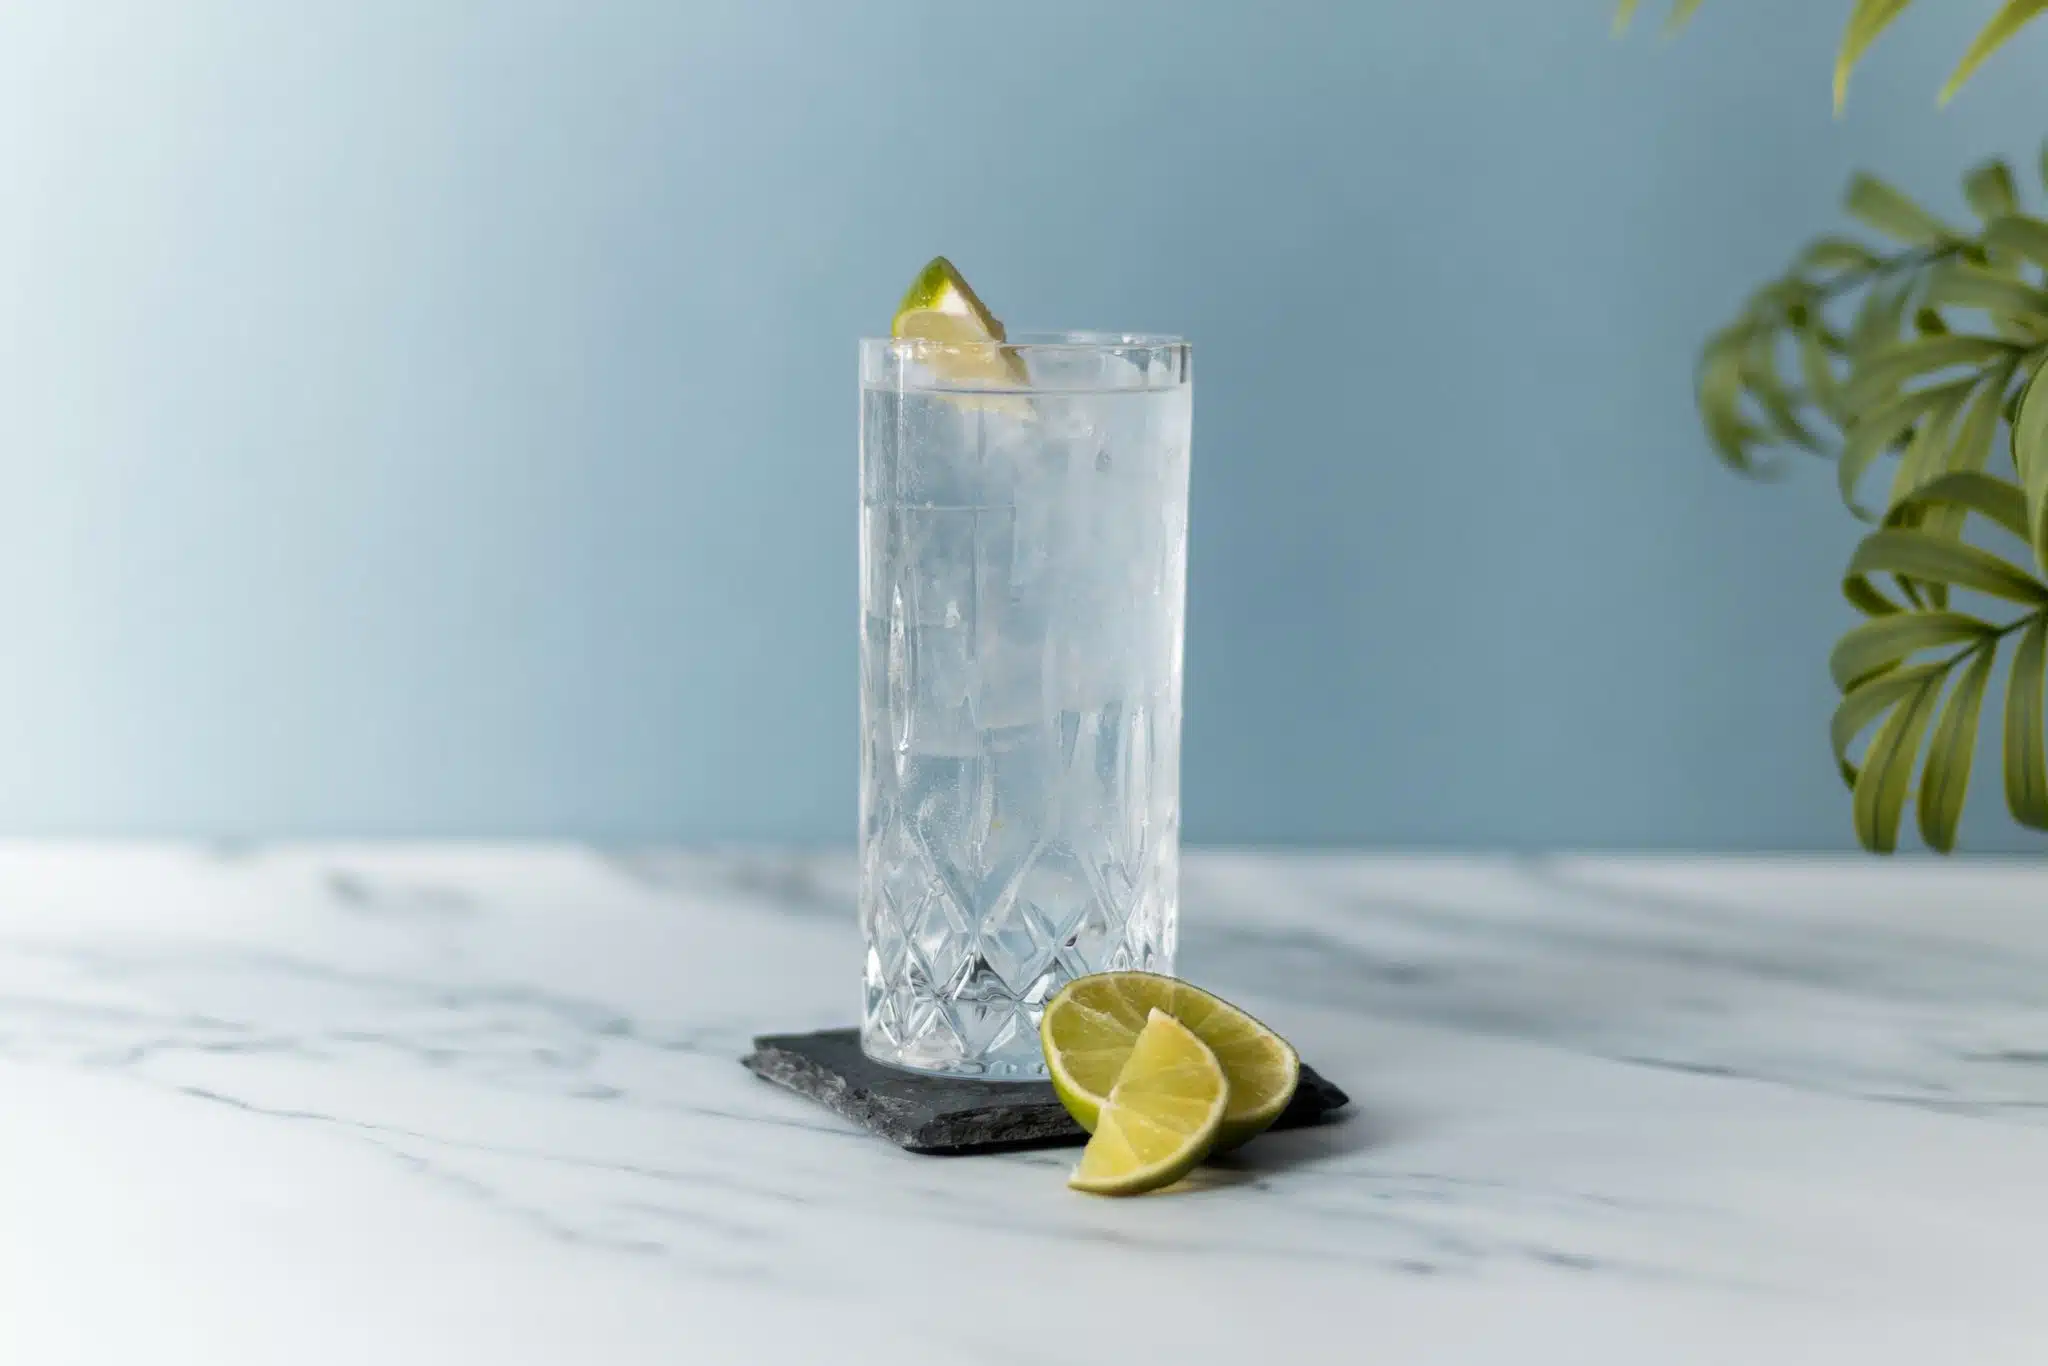 A side shot of a Gin Tonic cocktail in a highball glass on a black stone coaster with lime slices on the side placed on a white marmol table with a light blue background.